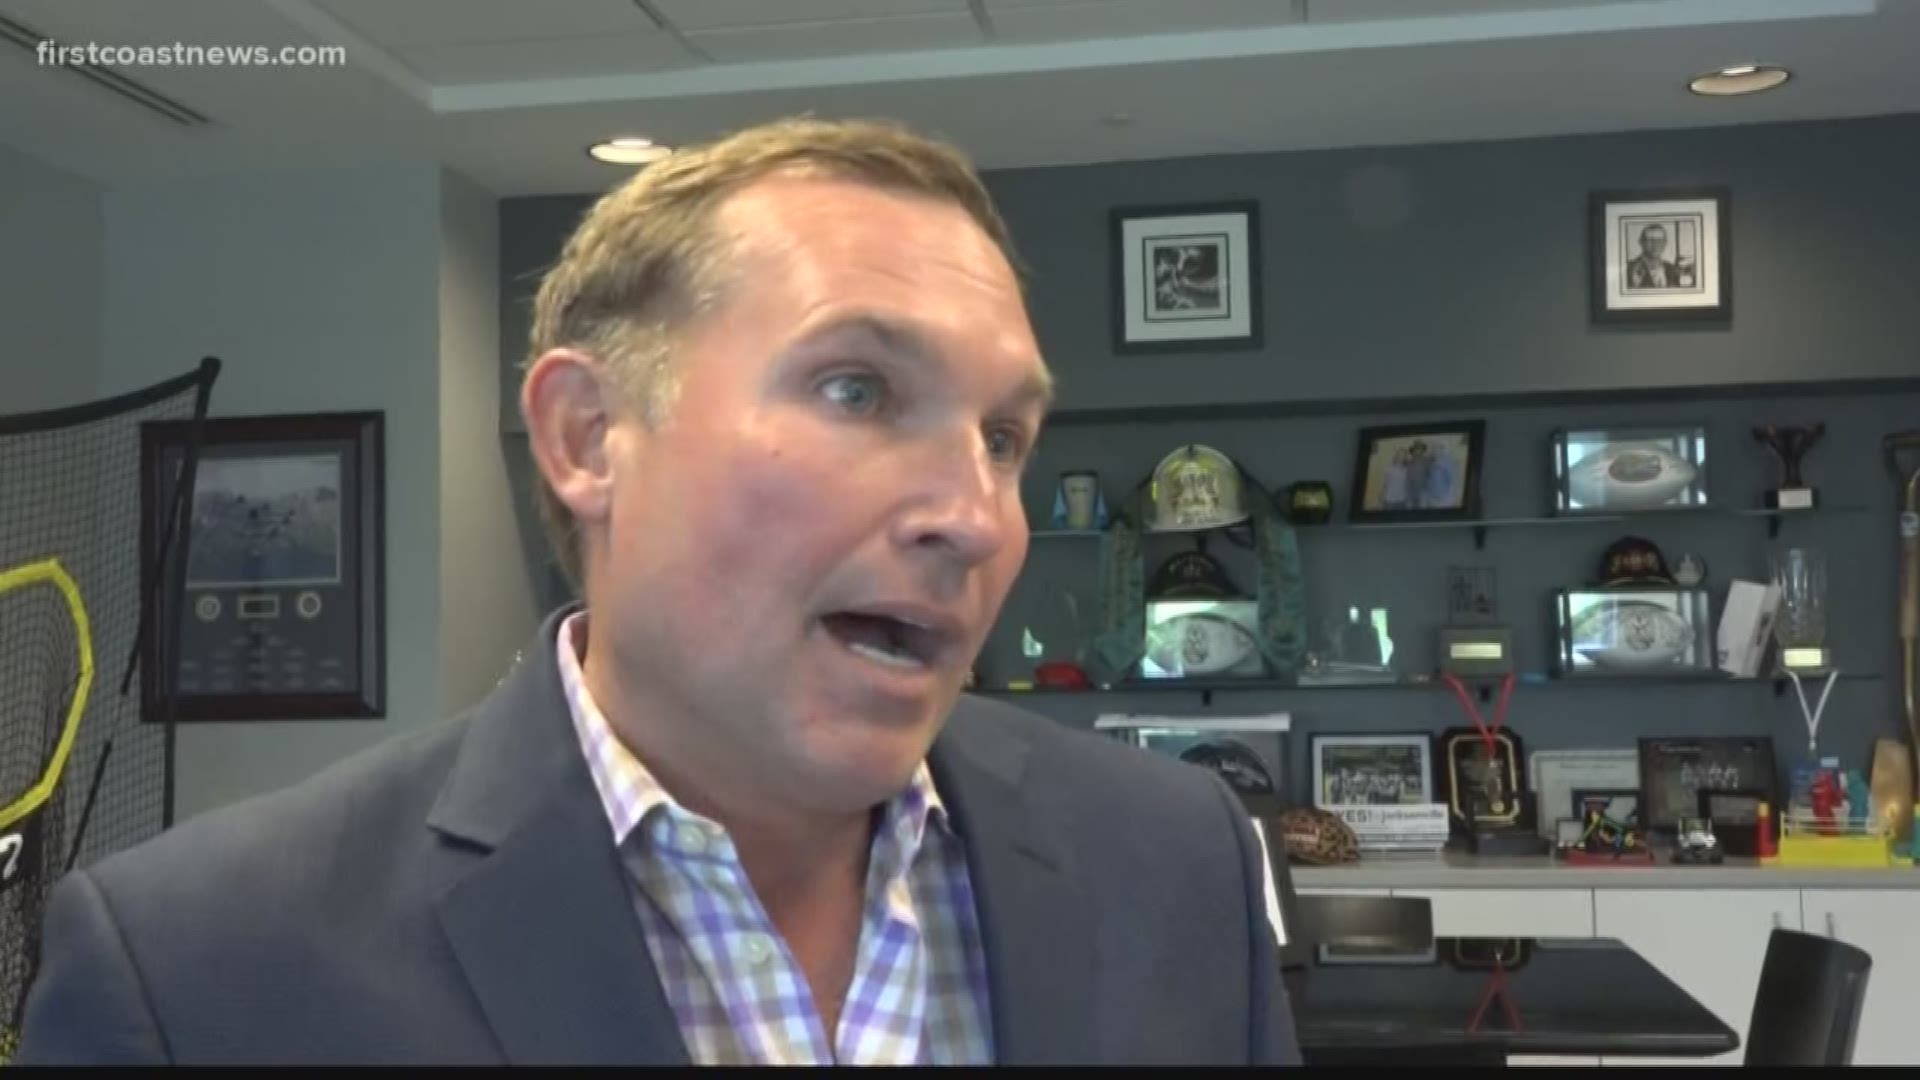 This week, Jacksonville Mayor Lenny Curry took heat for posts he made on social media Wednesday night.